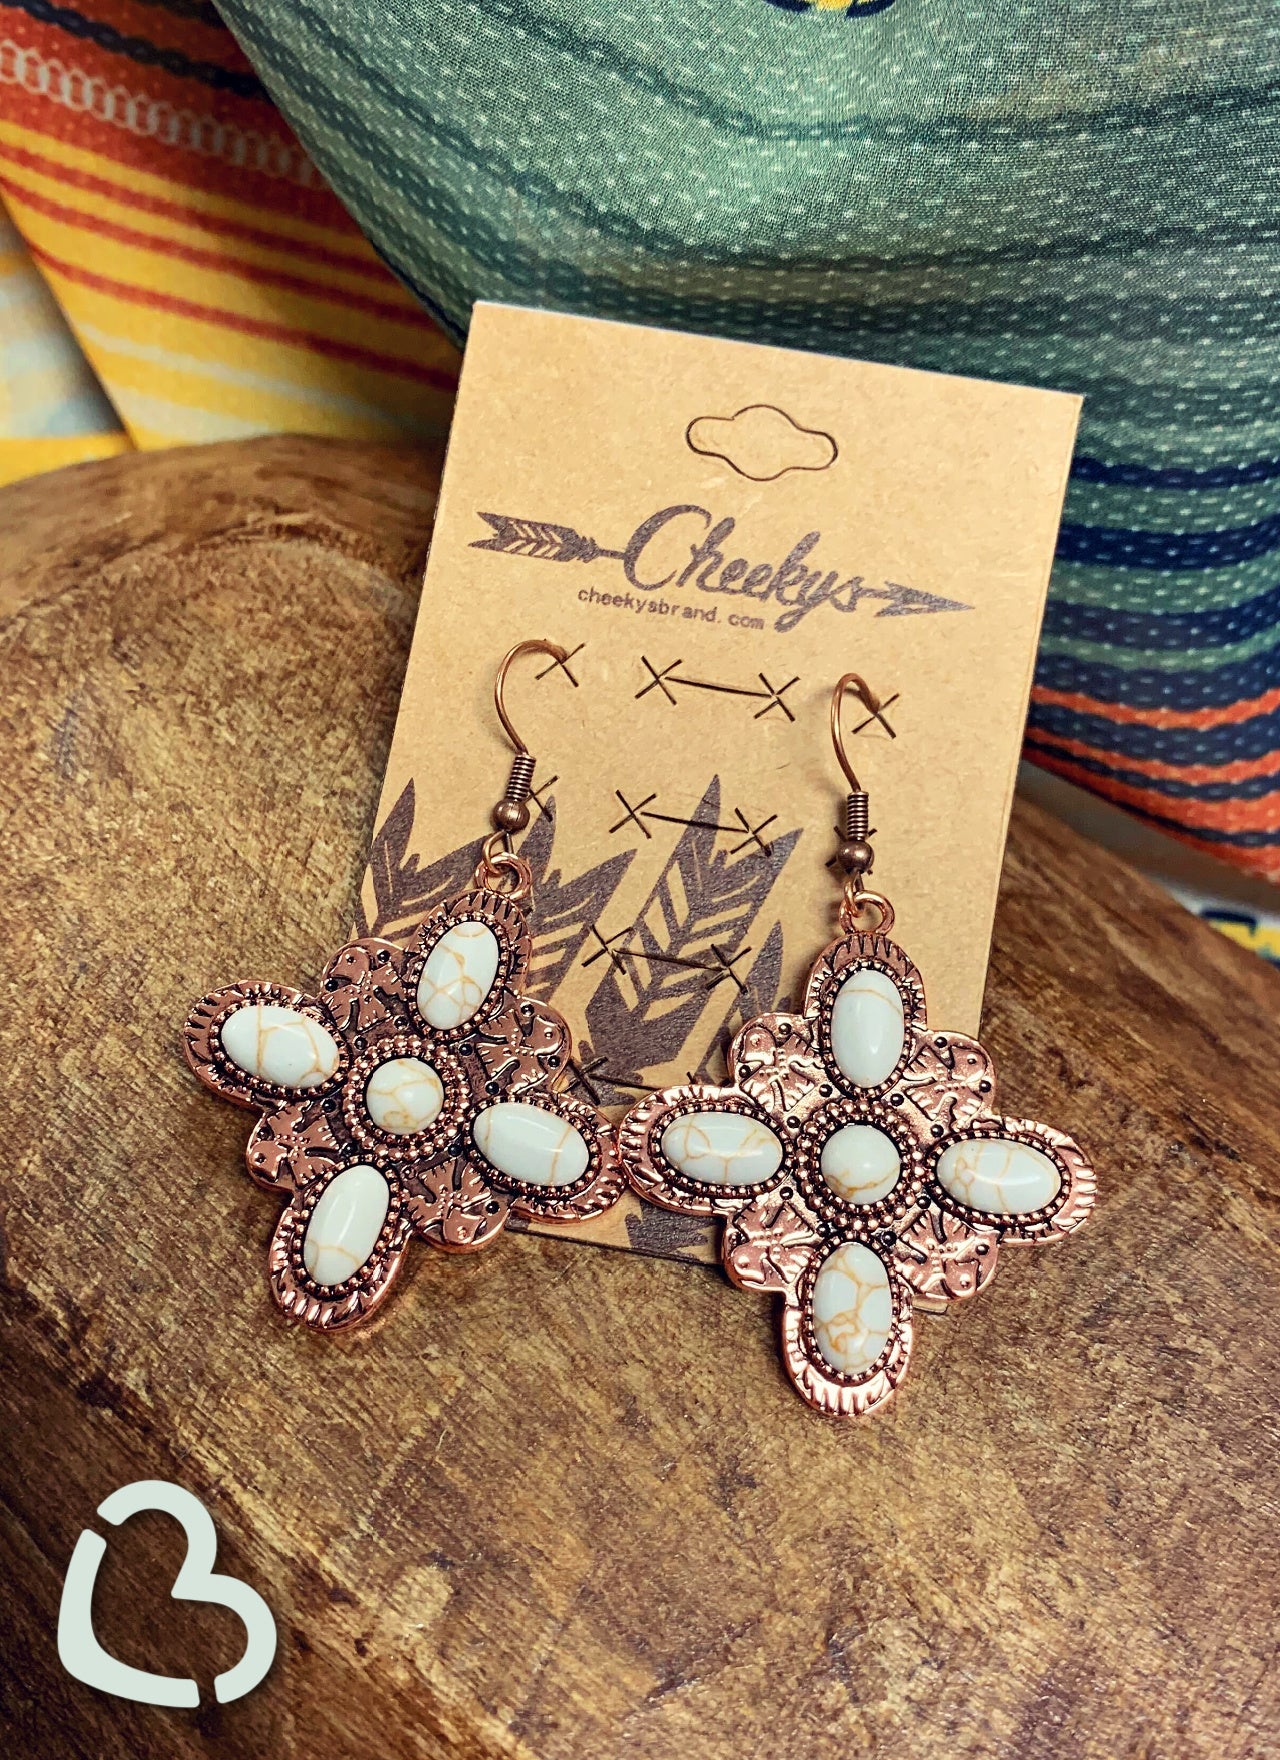 The Starburst Earrings in White Buffalo and Copper Jewelry 18 